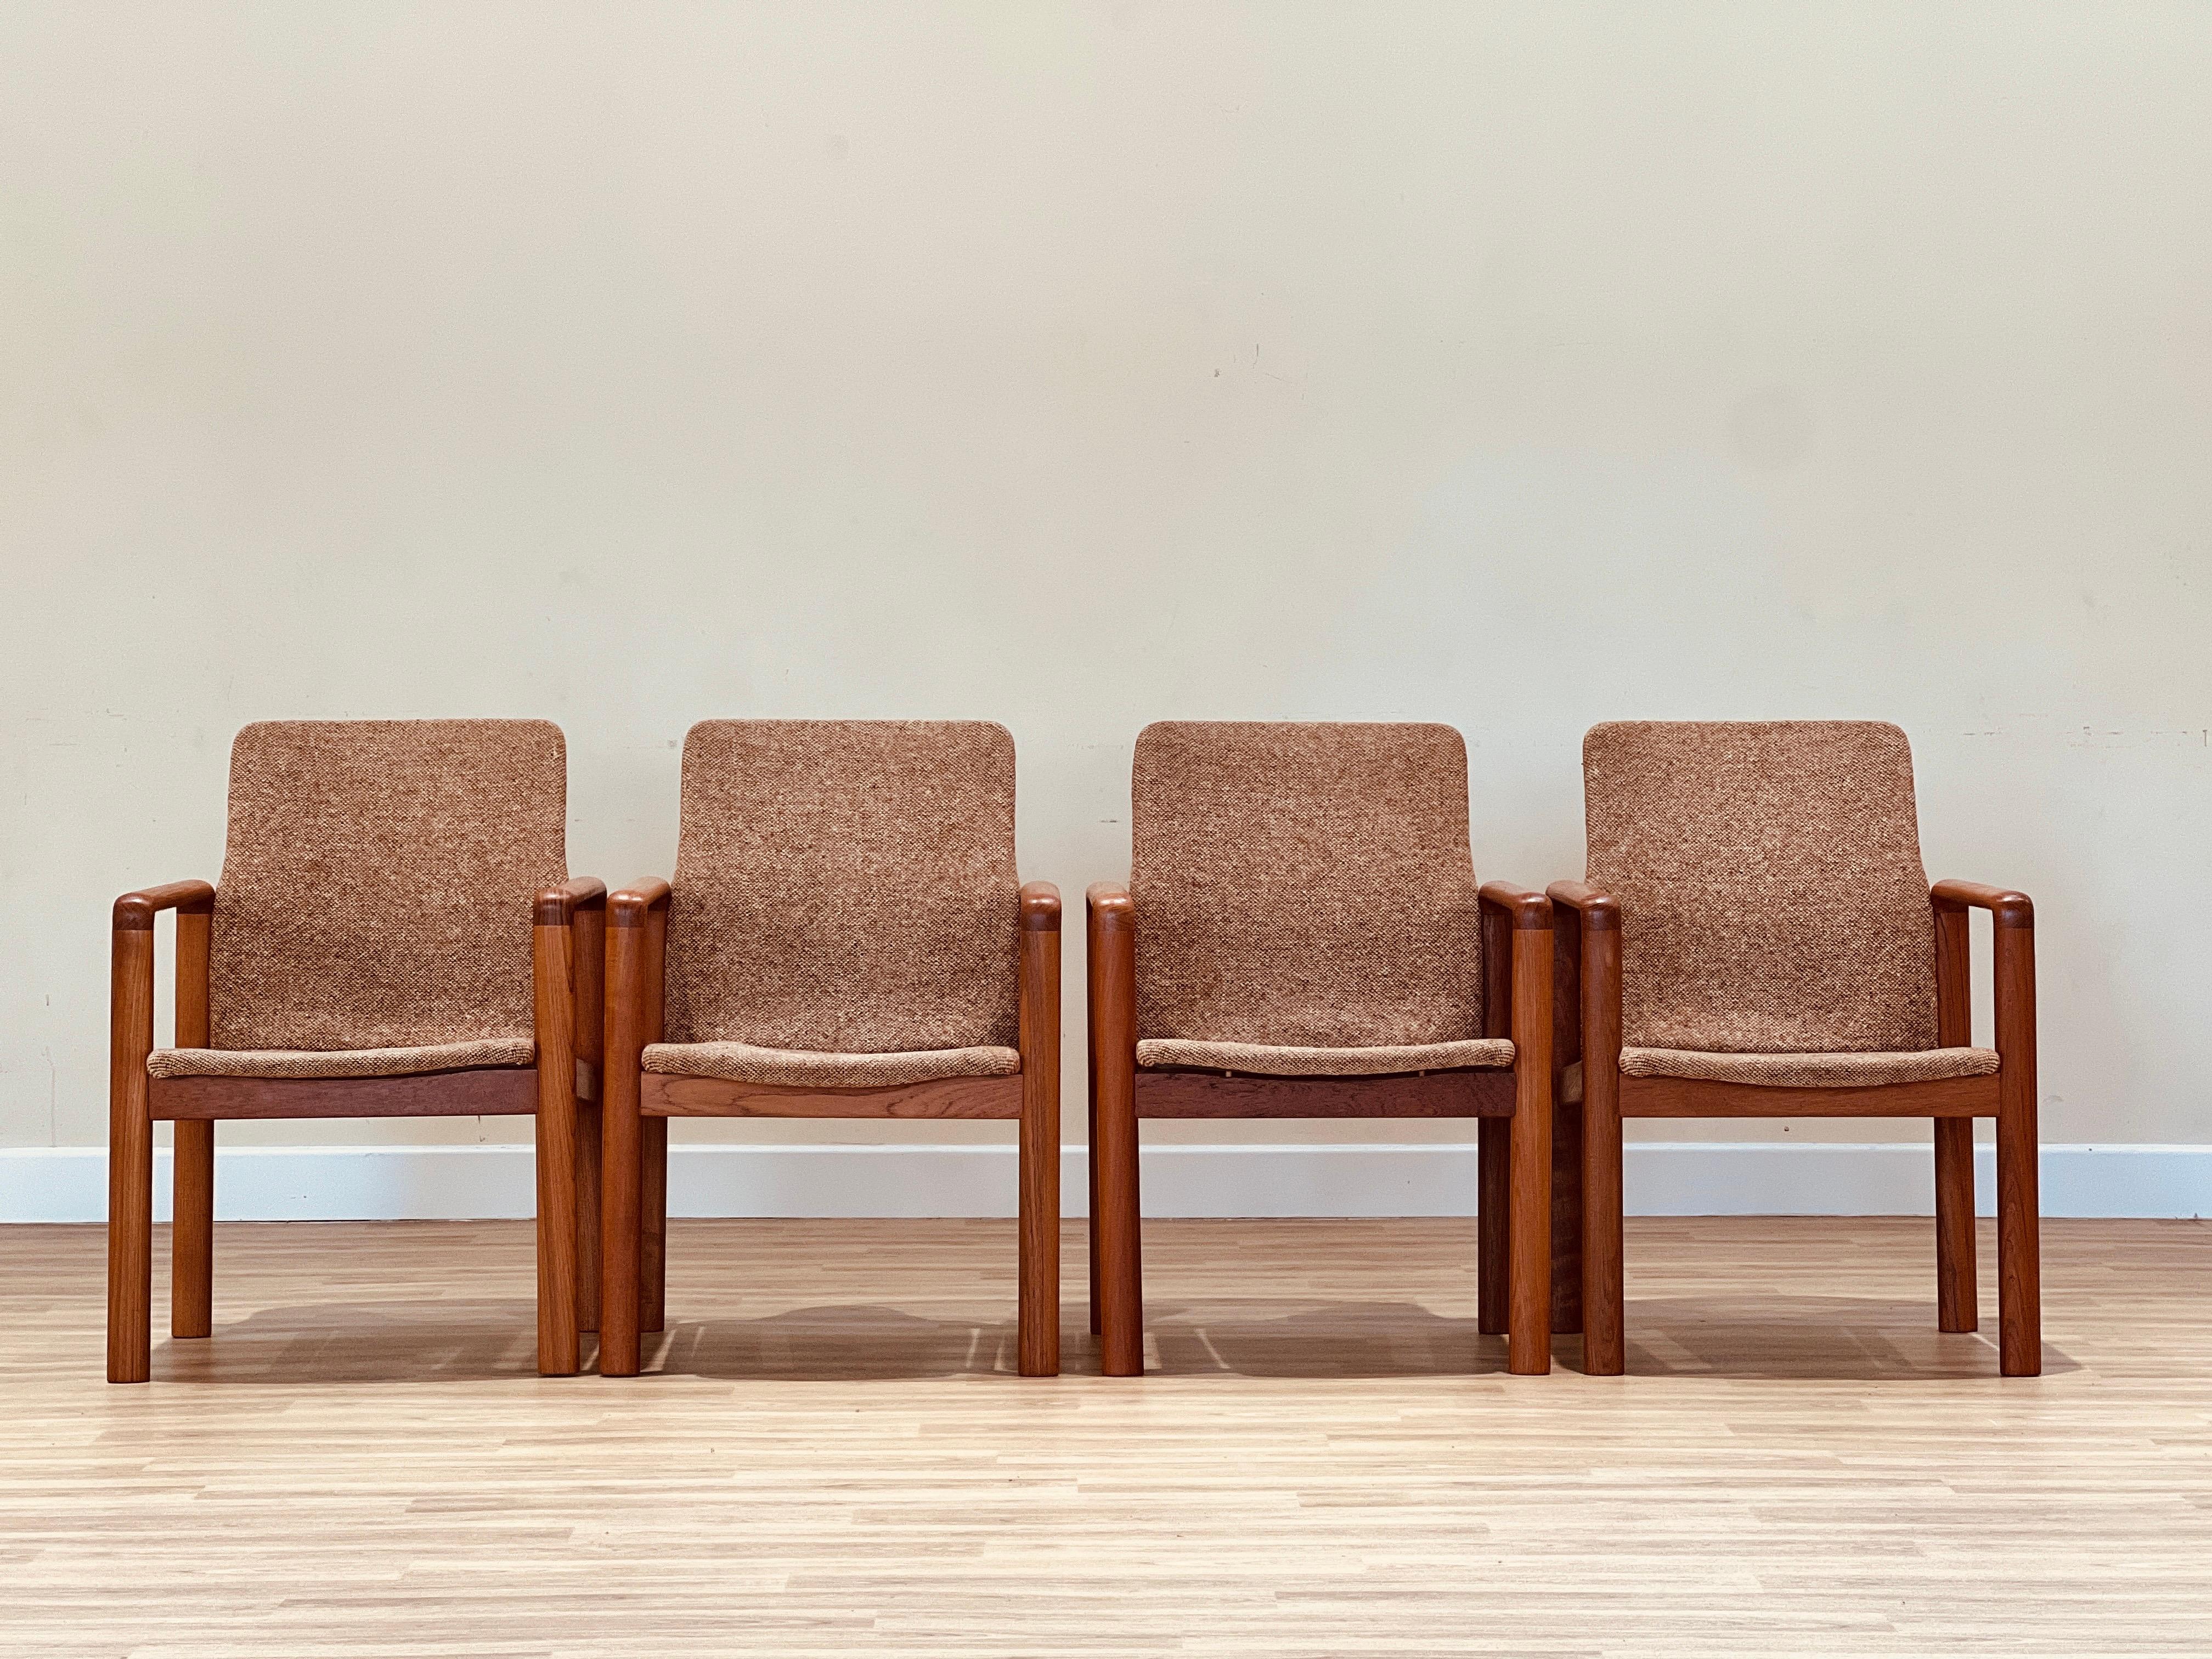 This stunning set of four armchairs is an actual work of art. Designed in the early ’70s by the renowned Danish cabinet maker Dyrlum, these chairs epitomise sophistication and style. Known as the conference chairs, they were the first design Dyrlum